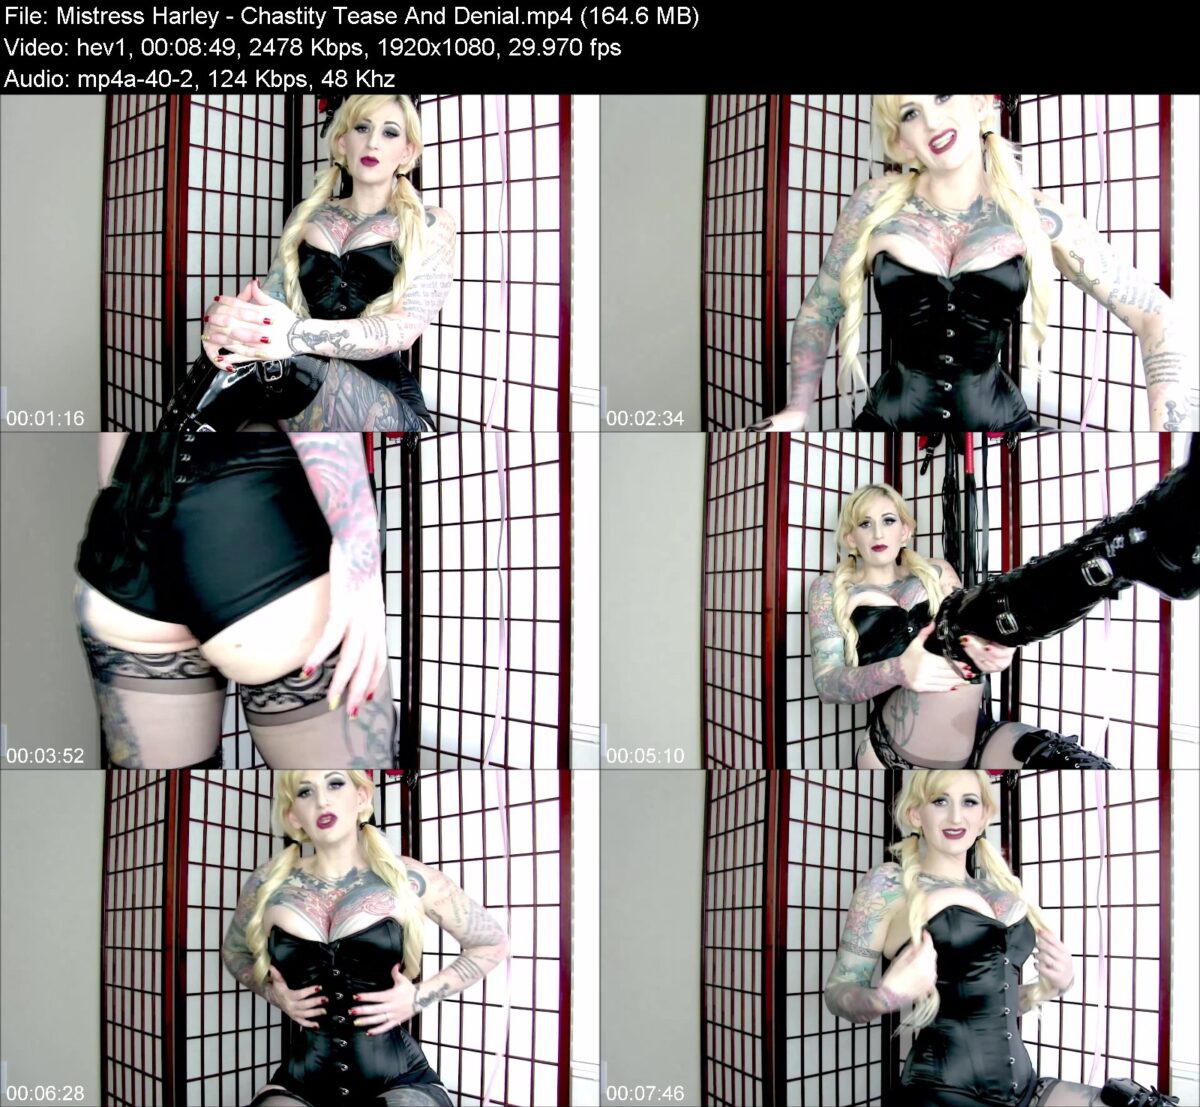 Mistress Harley in Chastity Tease And Denial